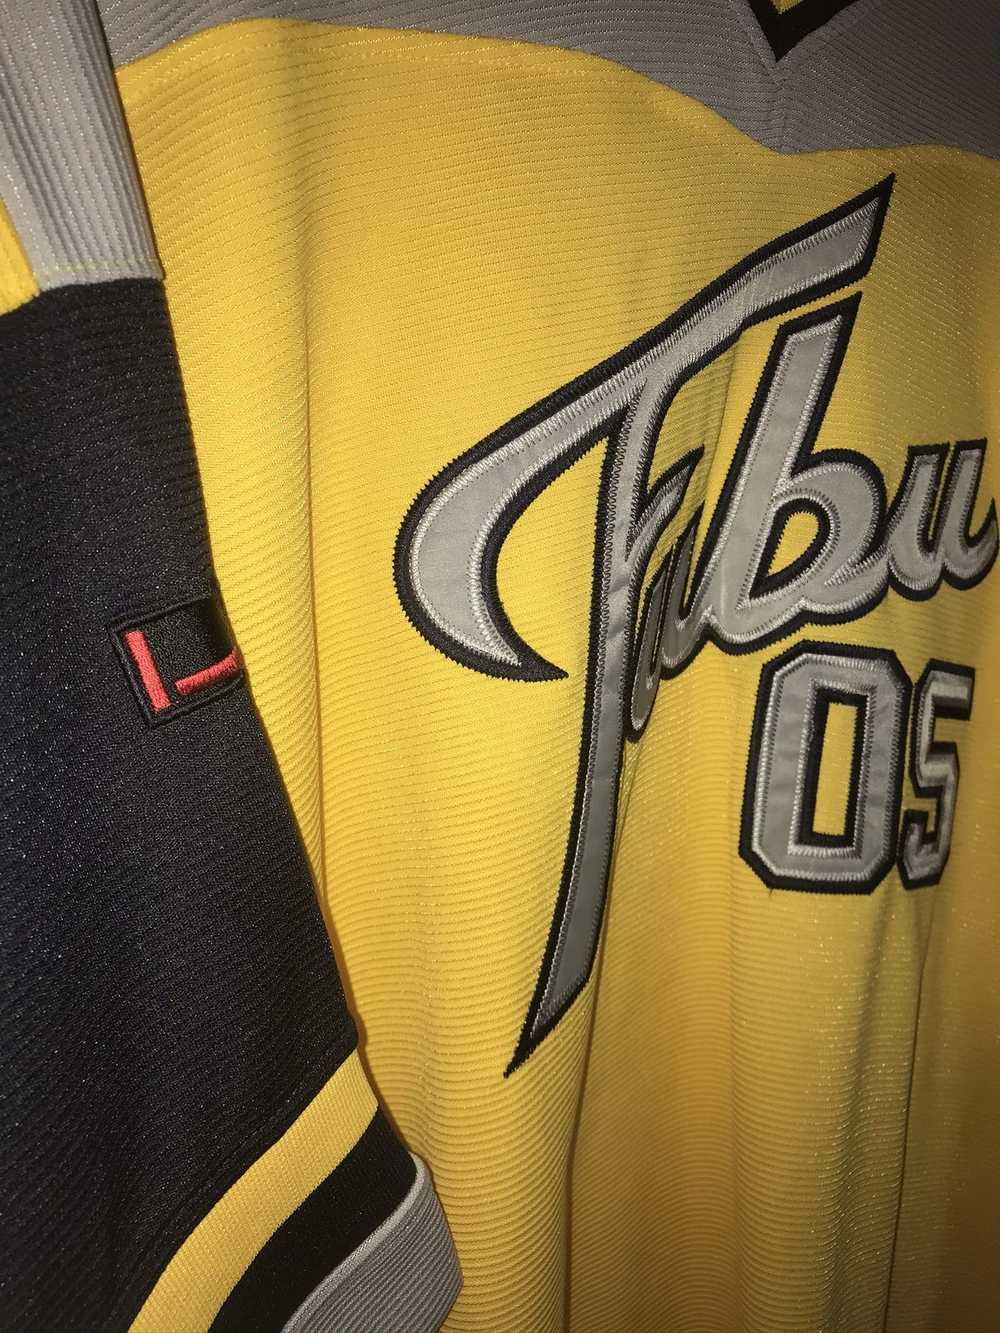 Fubu Jersey from 2005 collection - image 4